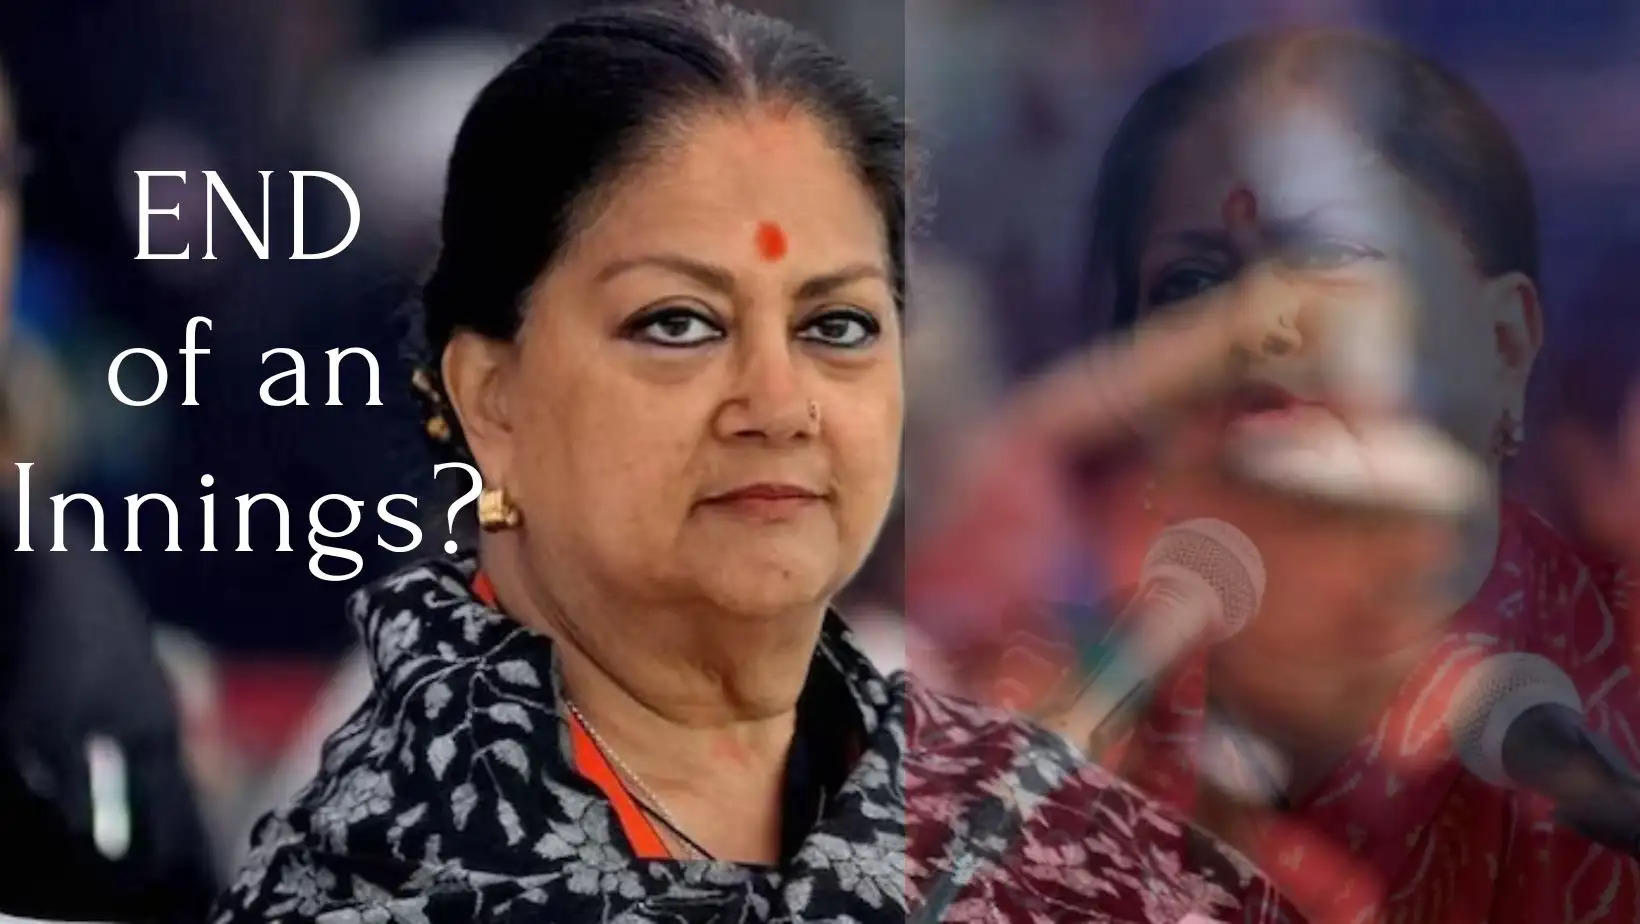 What does the appointment of a new Chief Minister Mean? End of an Innings of Vasundhara Raje Scindia? 